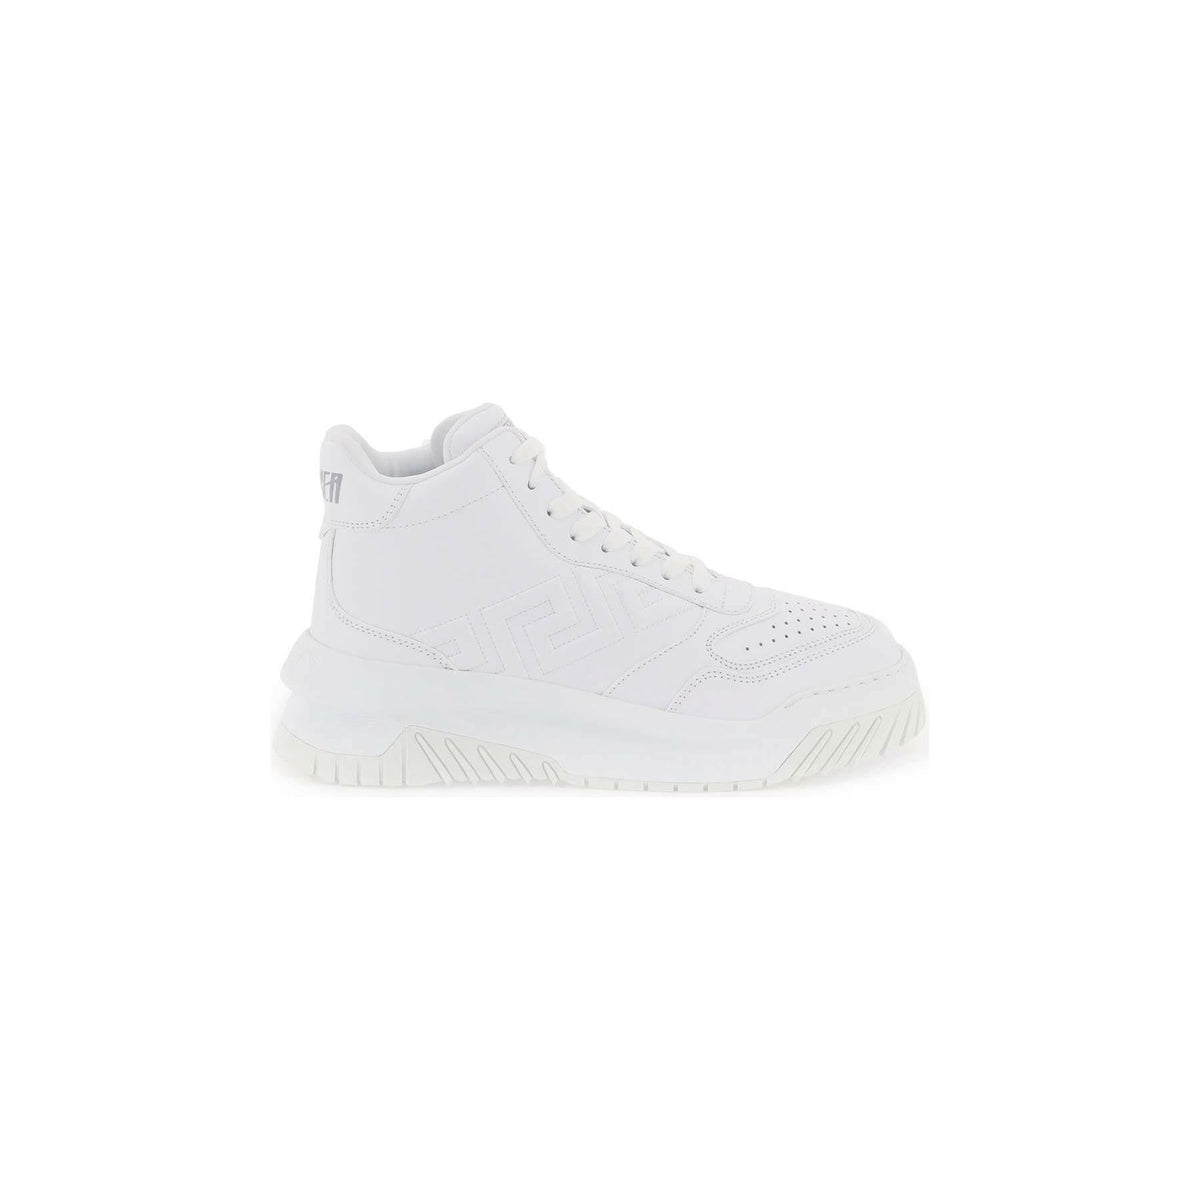 VERSACE - Optical White Smooth Leather Odissea Sneakers With Tone-On-Tone Embossed Motif - JOHN JULIA